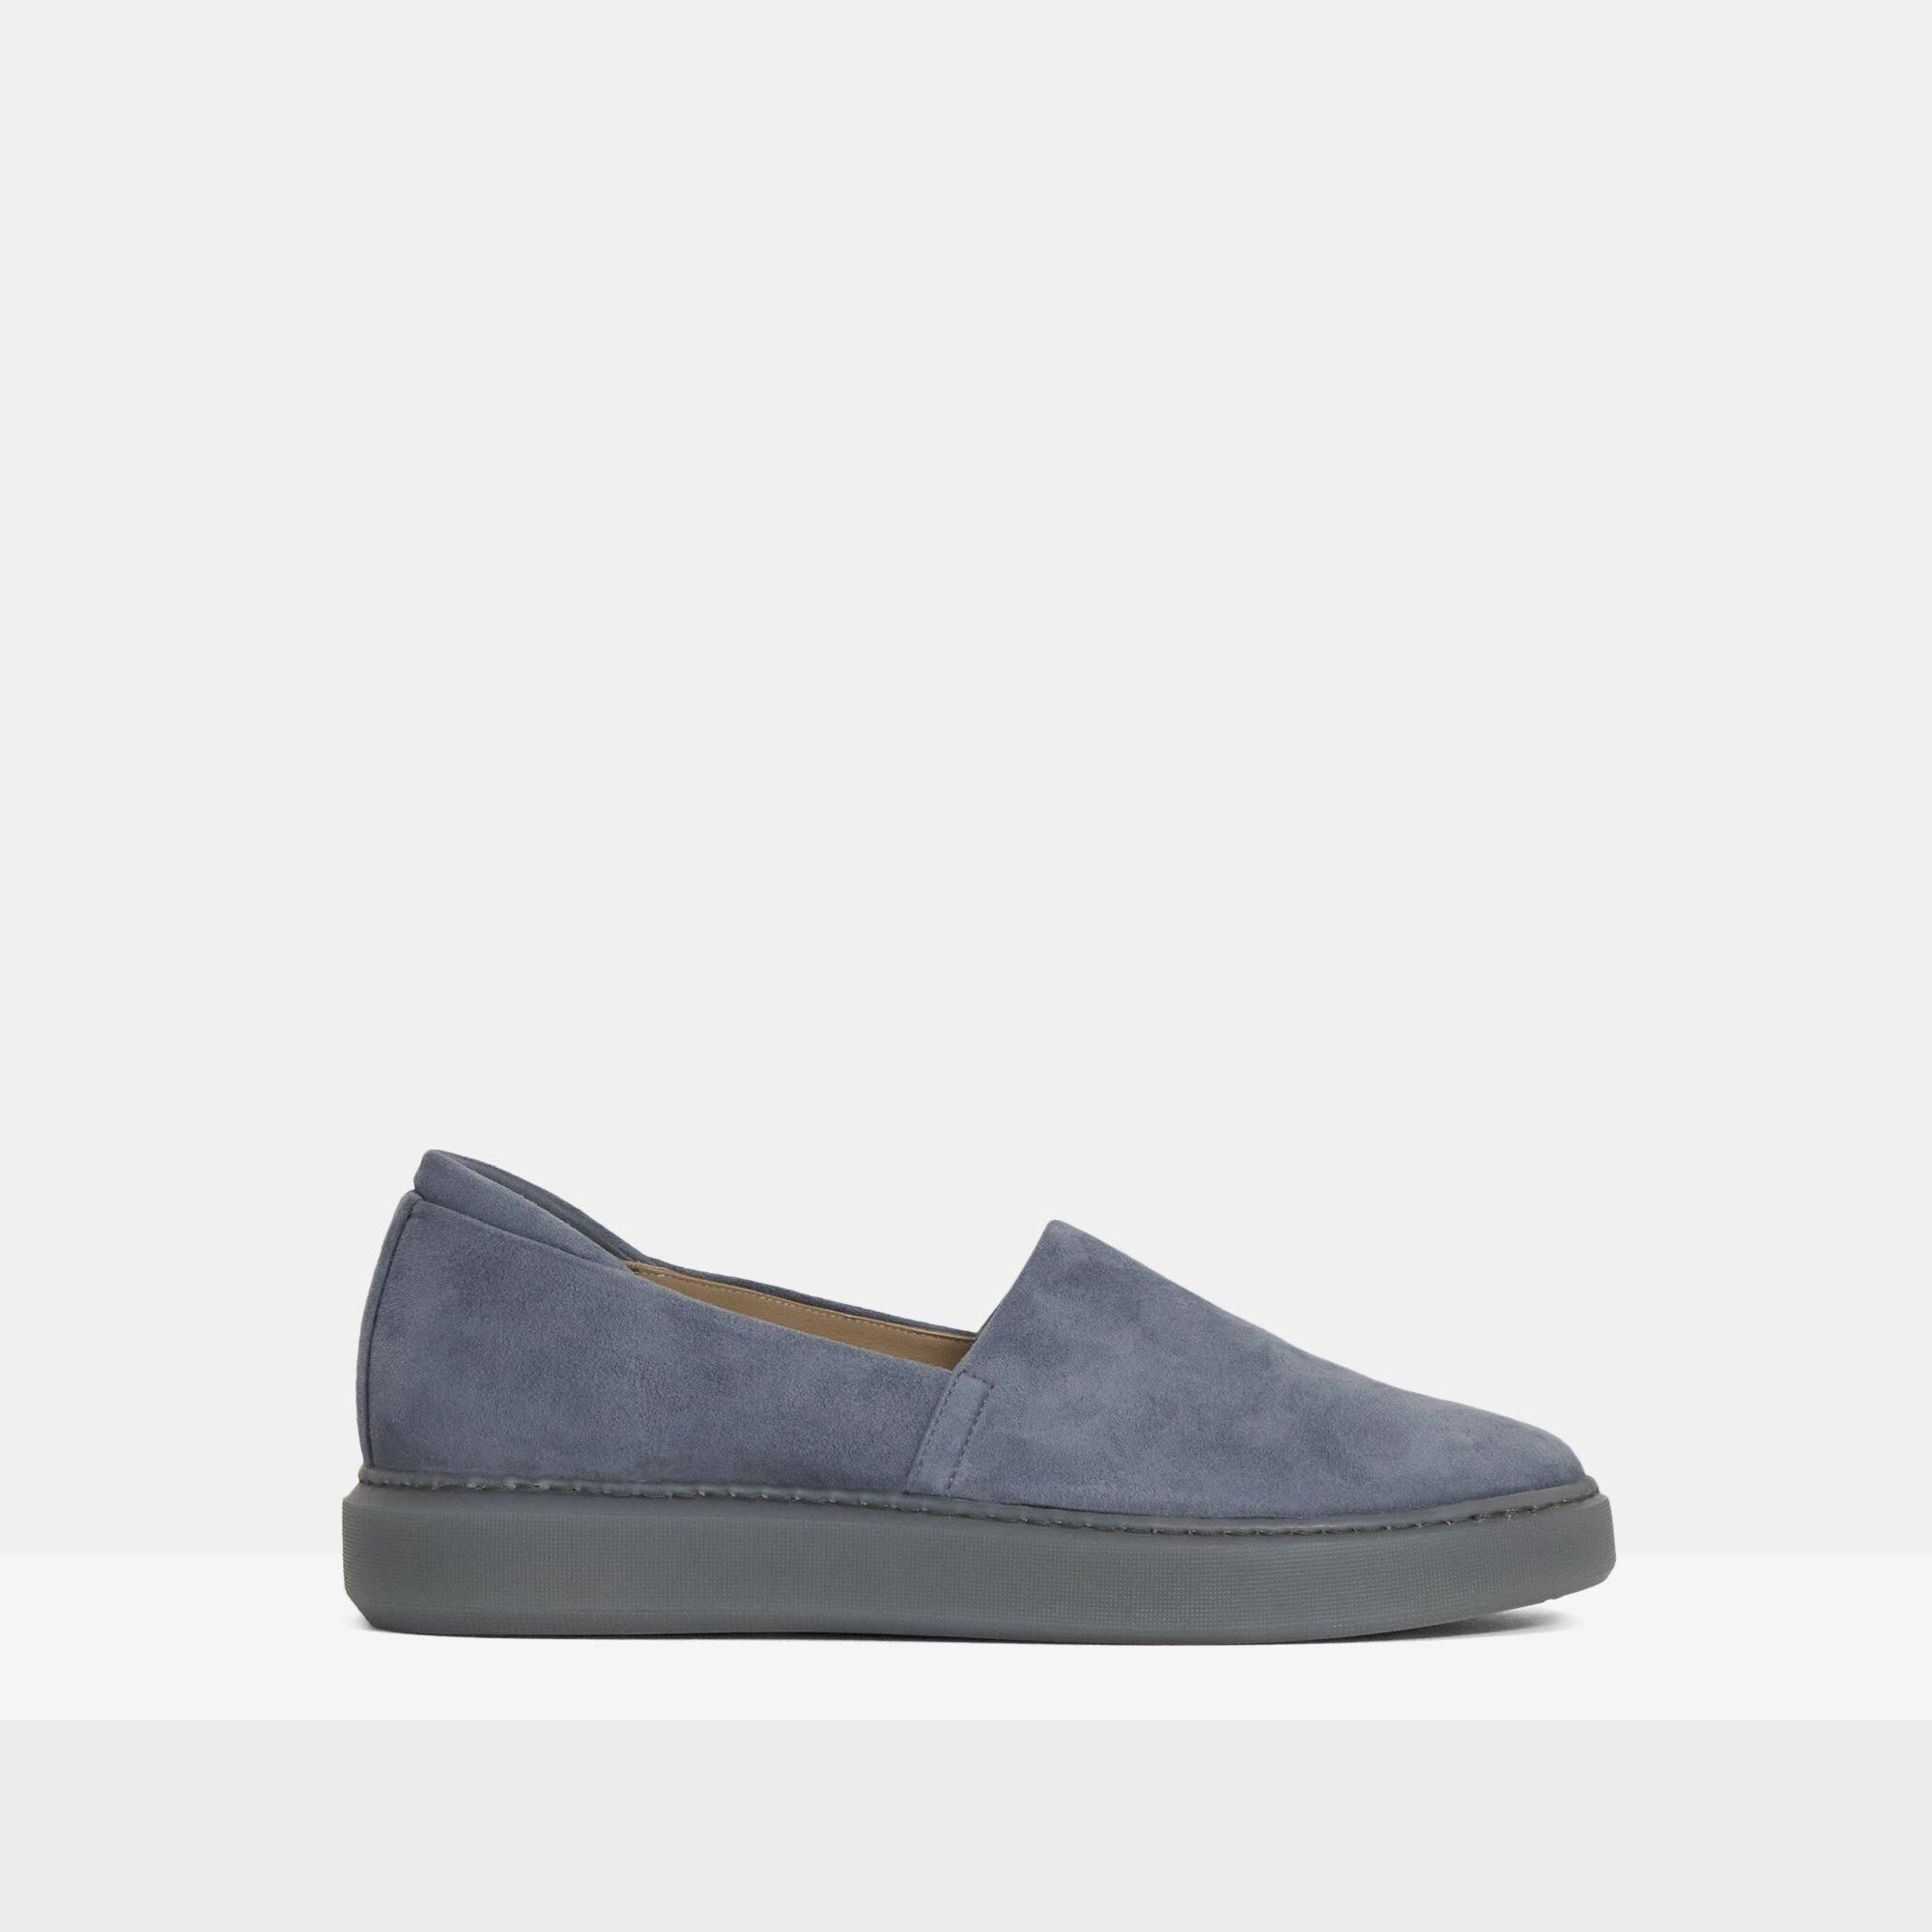 Theory Stitched Slip-On Sneaker in Suede